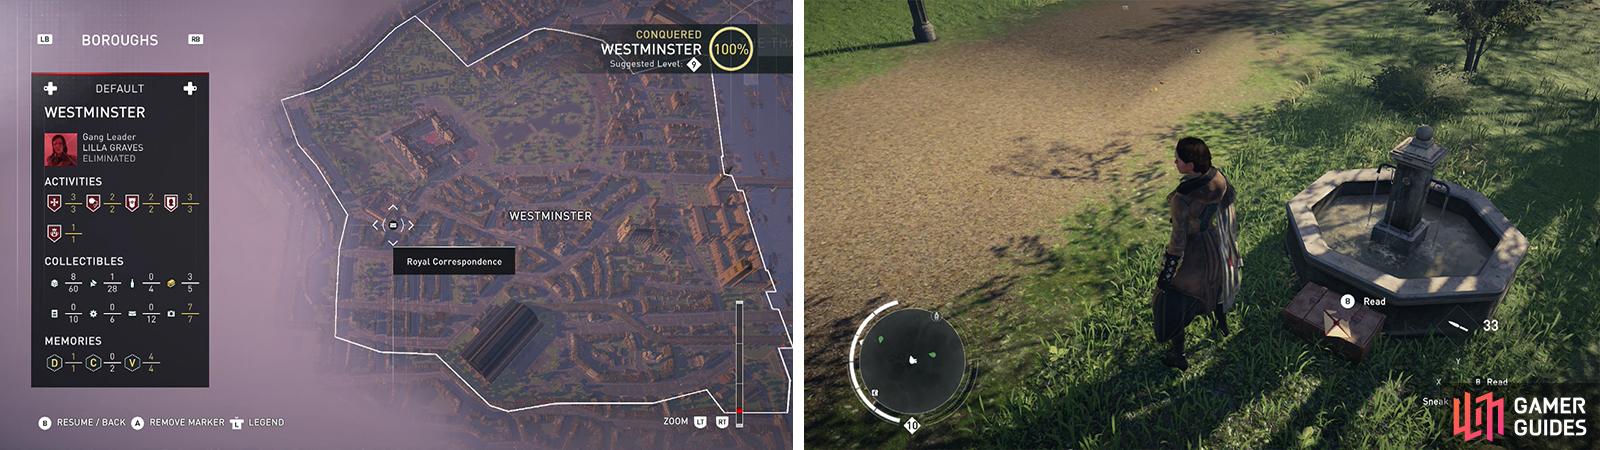 The Royal Correspondence icon on the world map (left) and what they look like in-game (right).